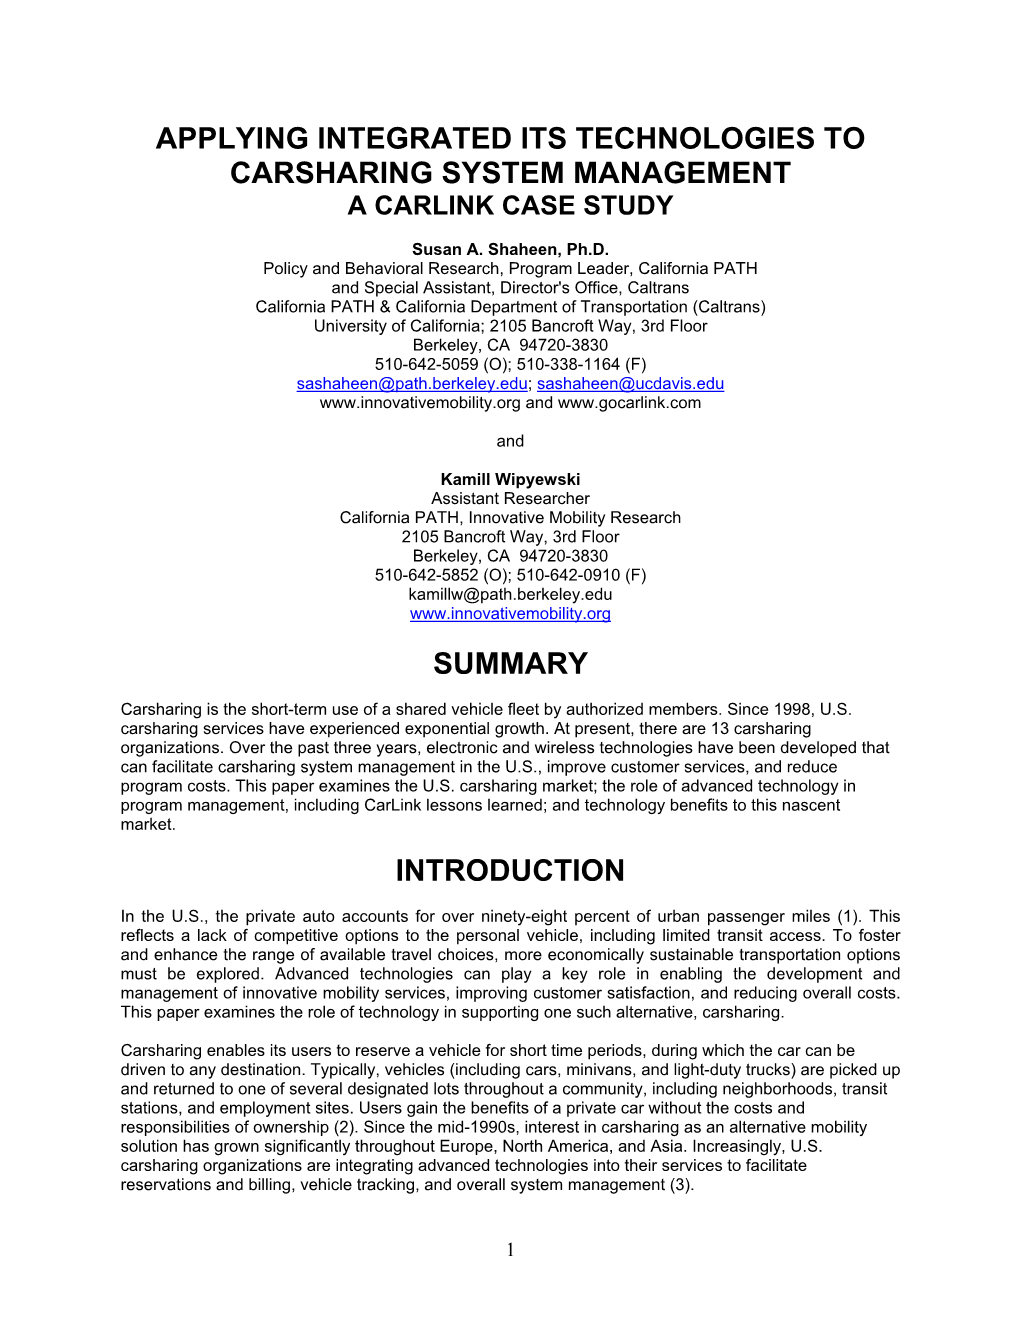 Applying Integrated Its Technologies to Carsharing System Management Summary Introduction